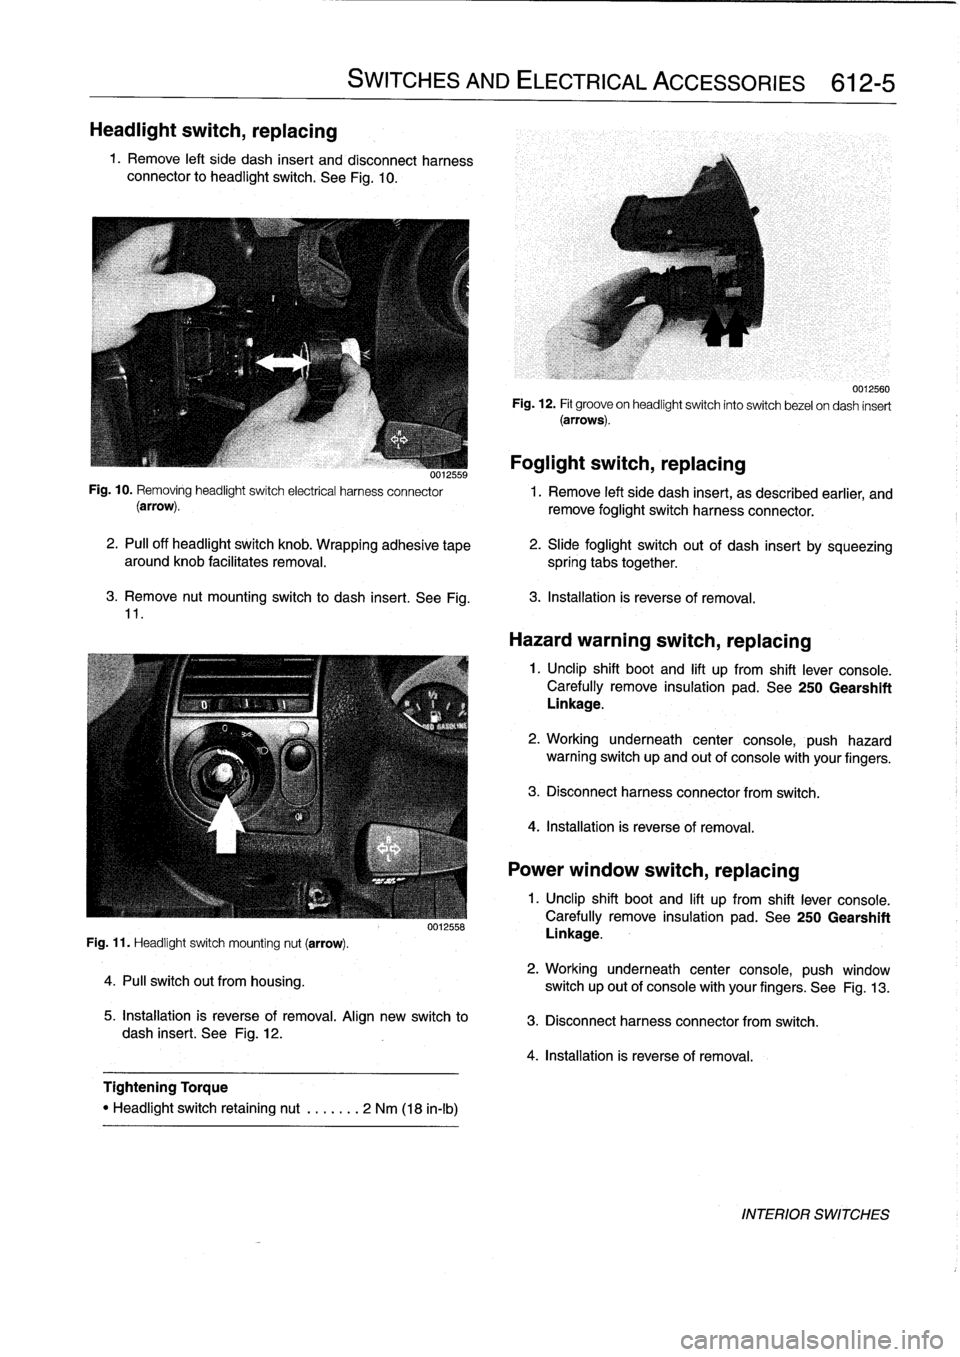 BMW 318i 1997 E36 User Guide 
Headlight
switch,
replacing

1
.
Remove
left
side
dash
insert
and
disconnect
harness
connector
to
headlight
switch
.
See
Fig
.
10
.

3
.
Remove
nut
mounting
switch
to
dash
insert
.
See
Fig
.
11
.

Fi